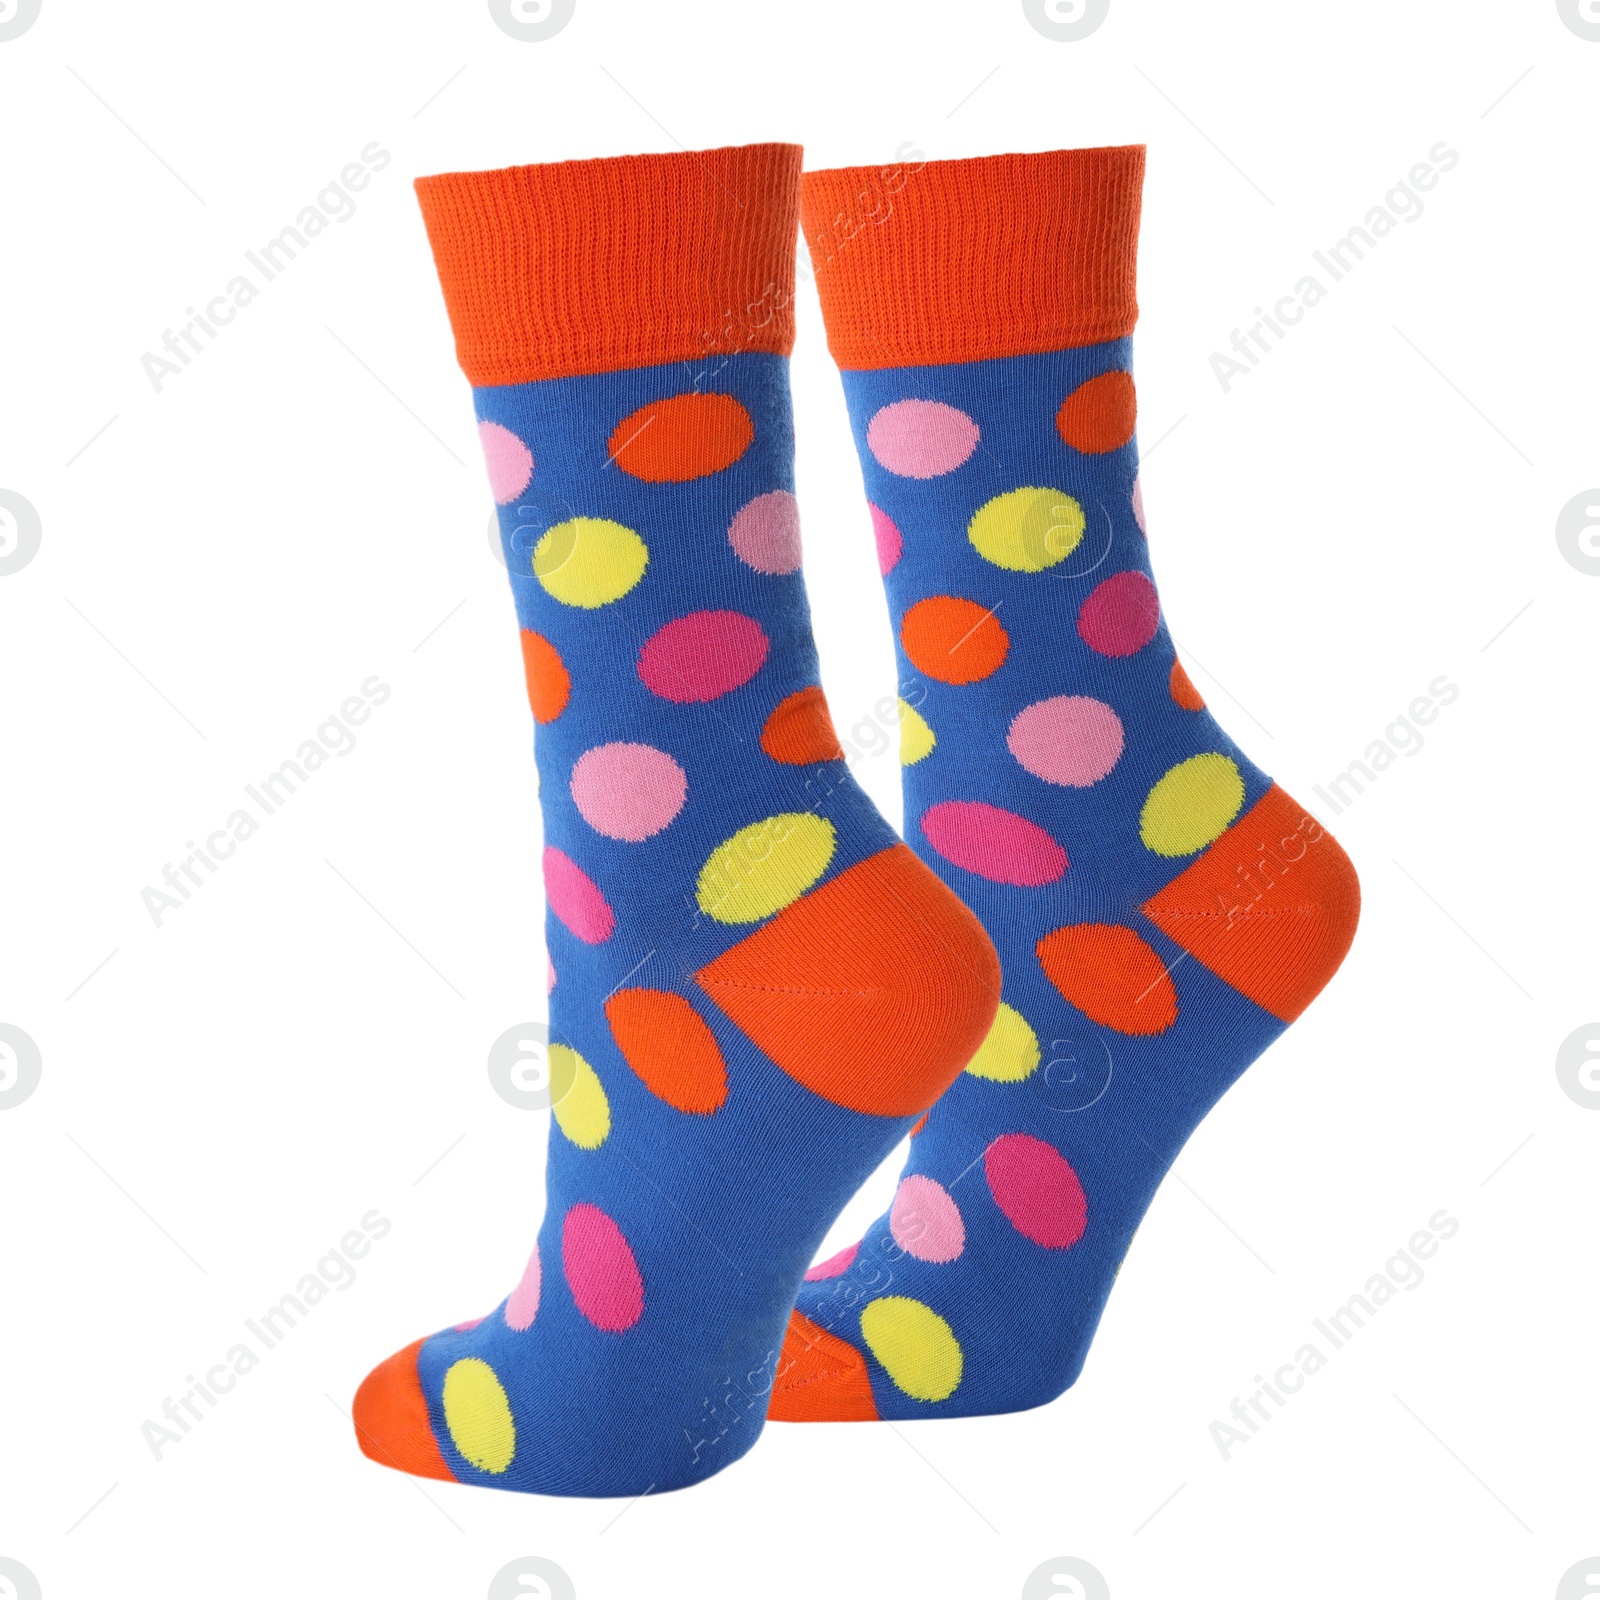 Image of Pair of bright socks isolated on white